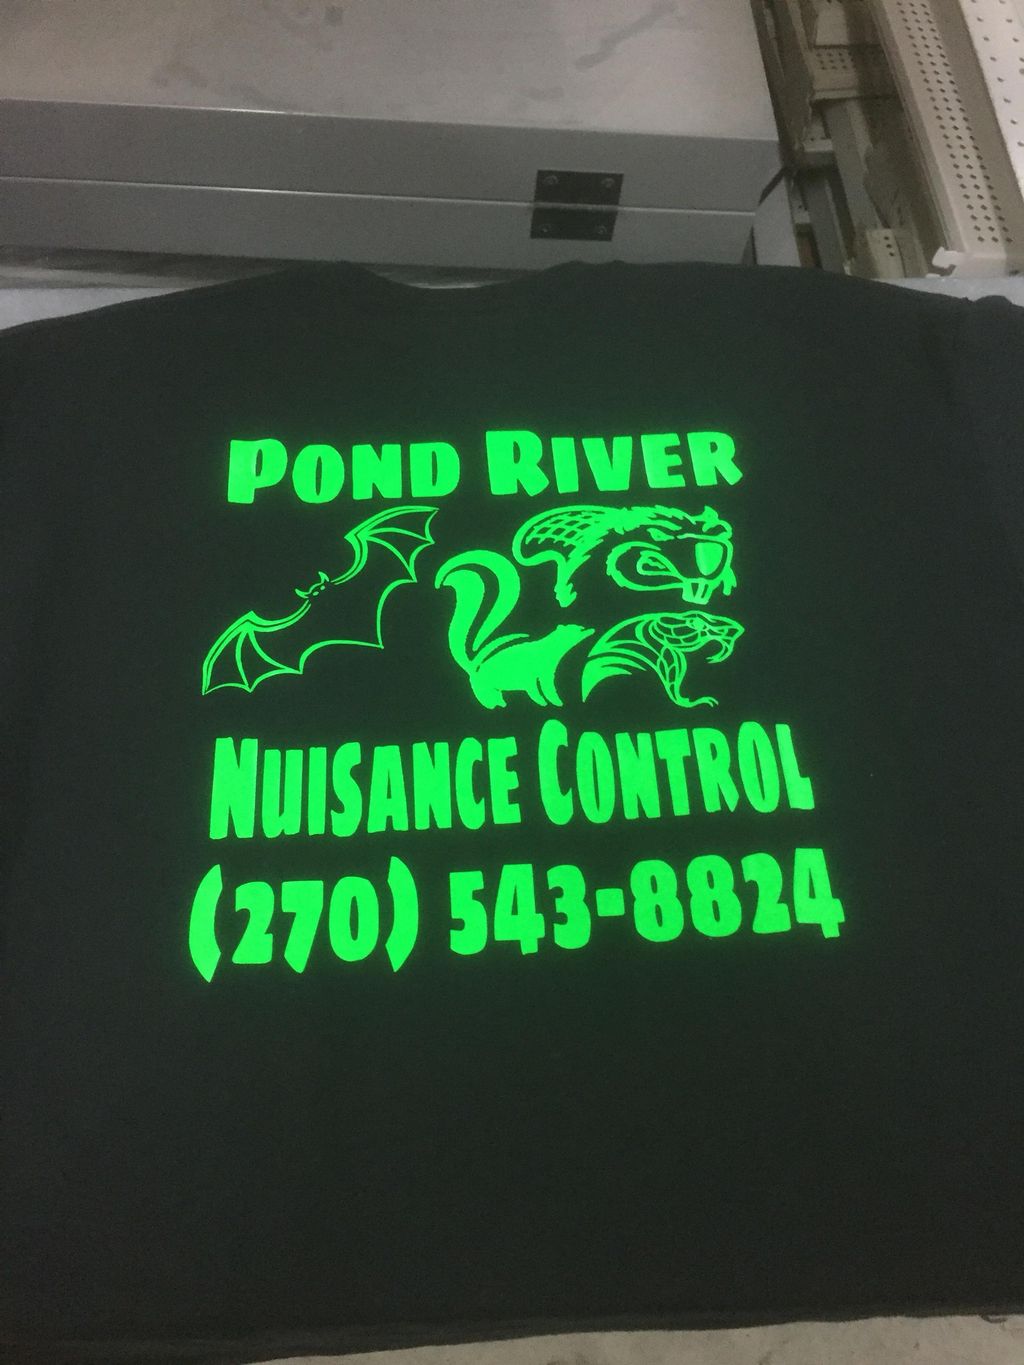 Pond River Nuisance Control